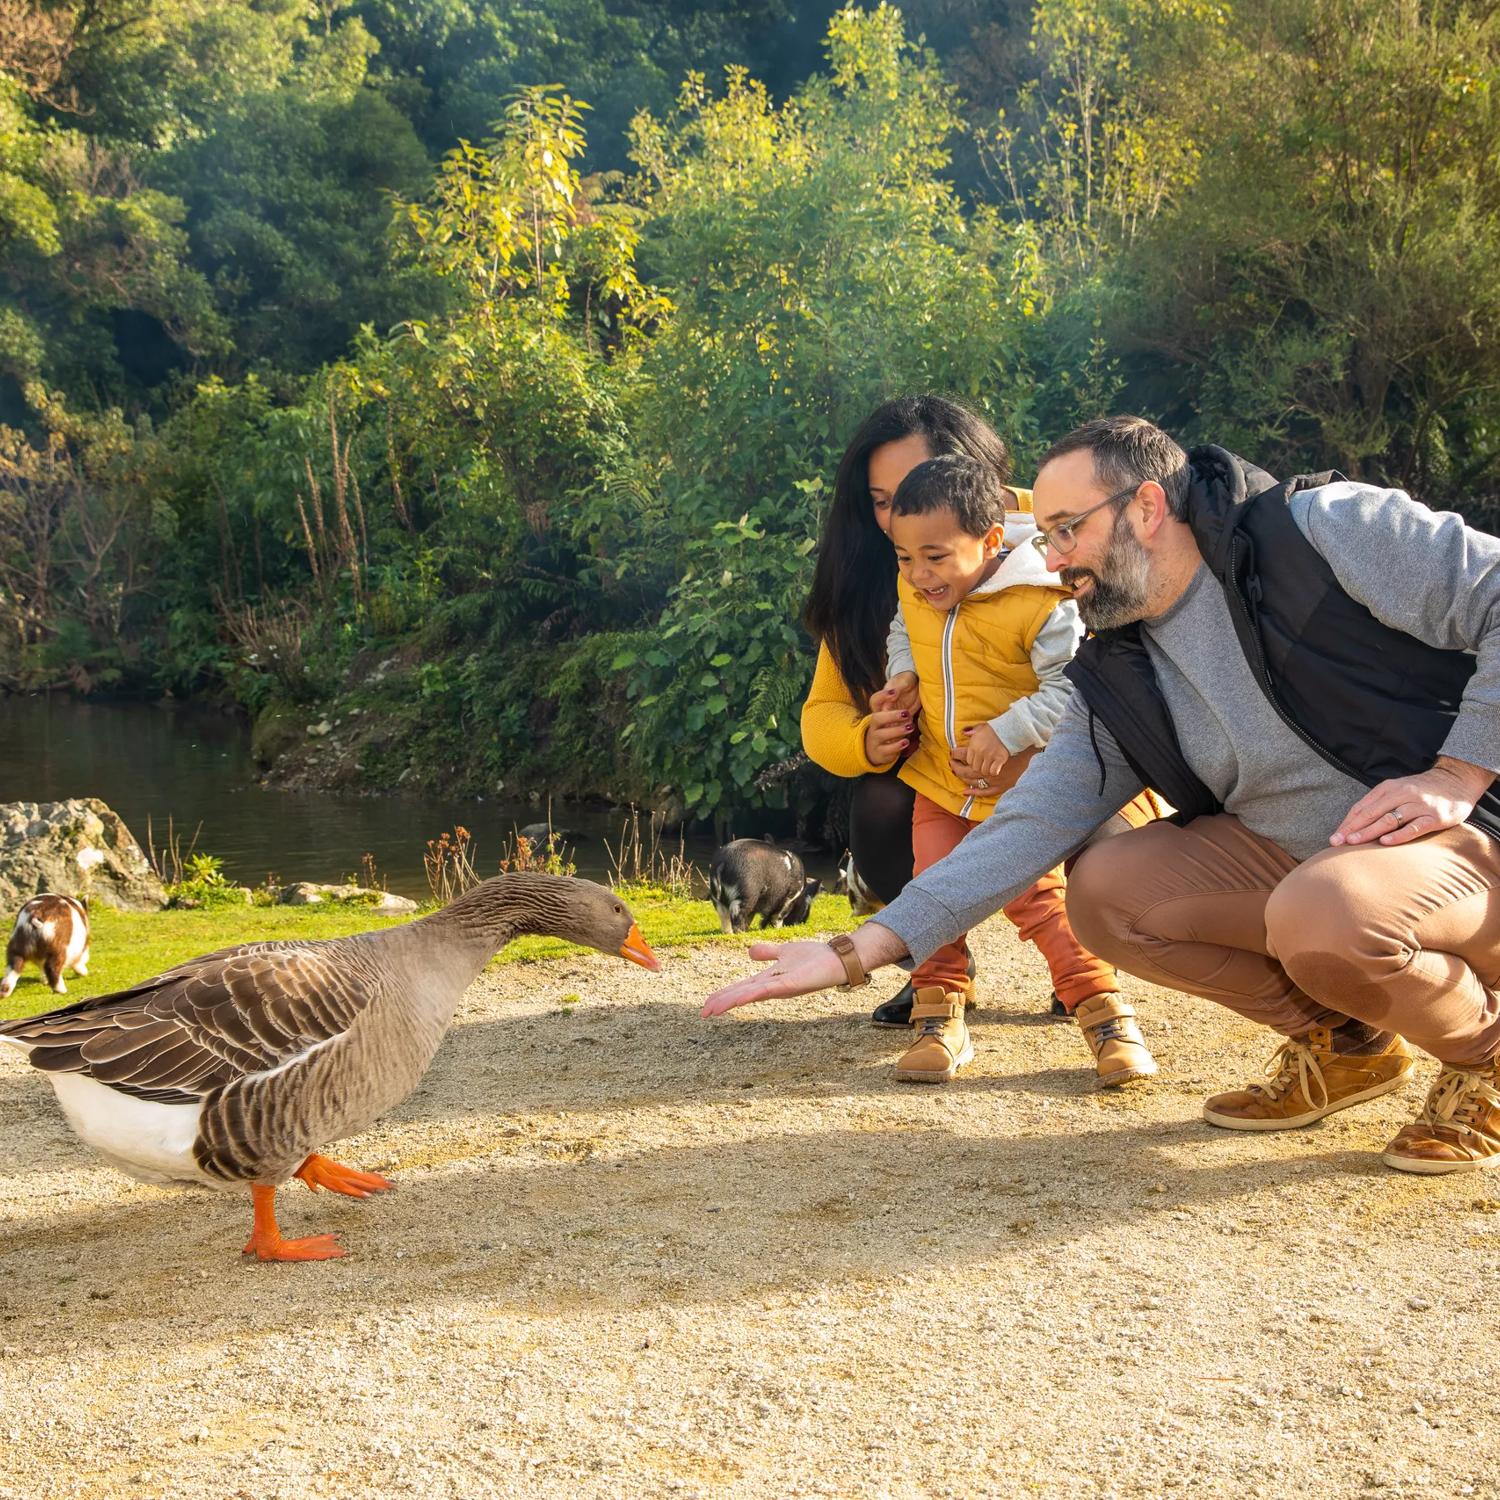 A family with a young child feed a duck next to the pond at Staglands.